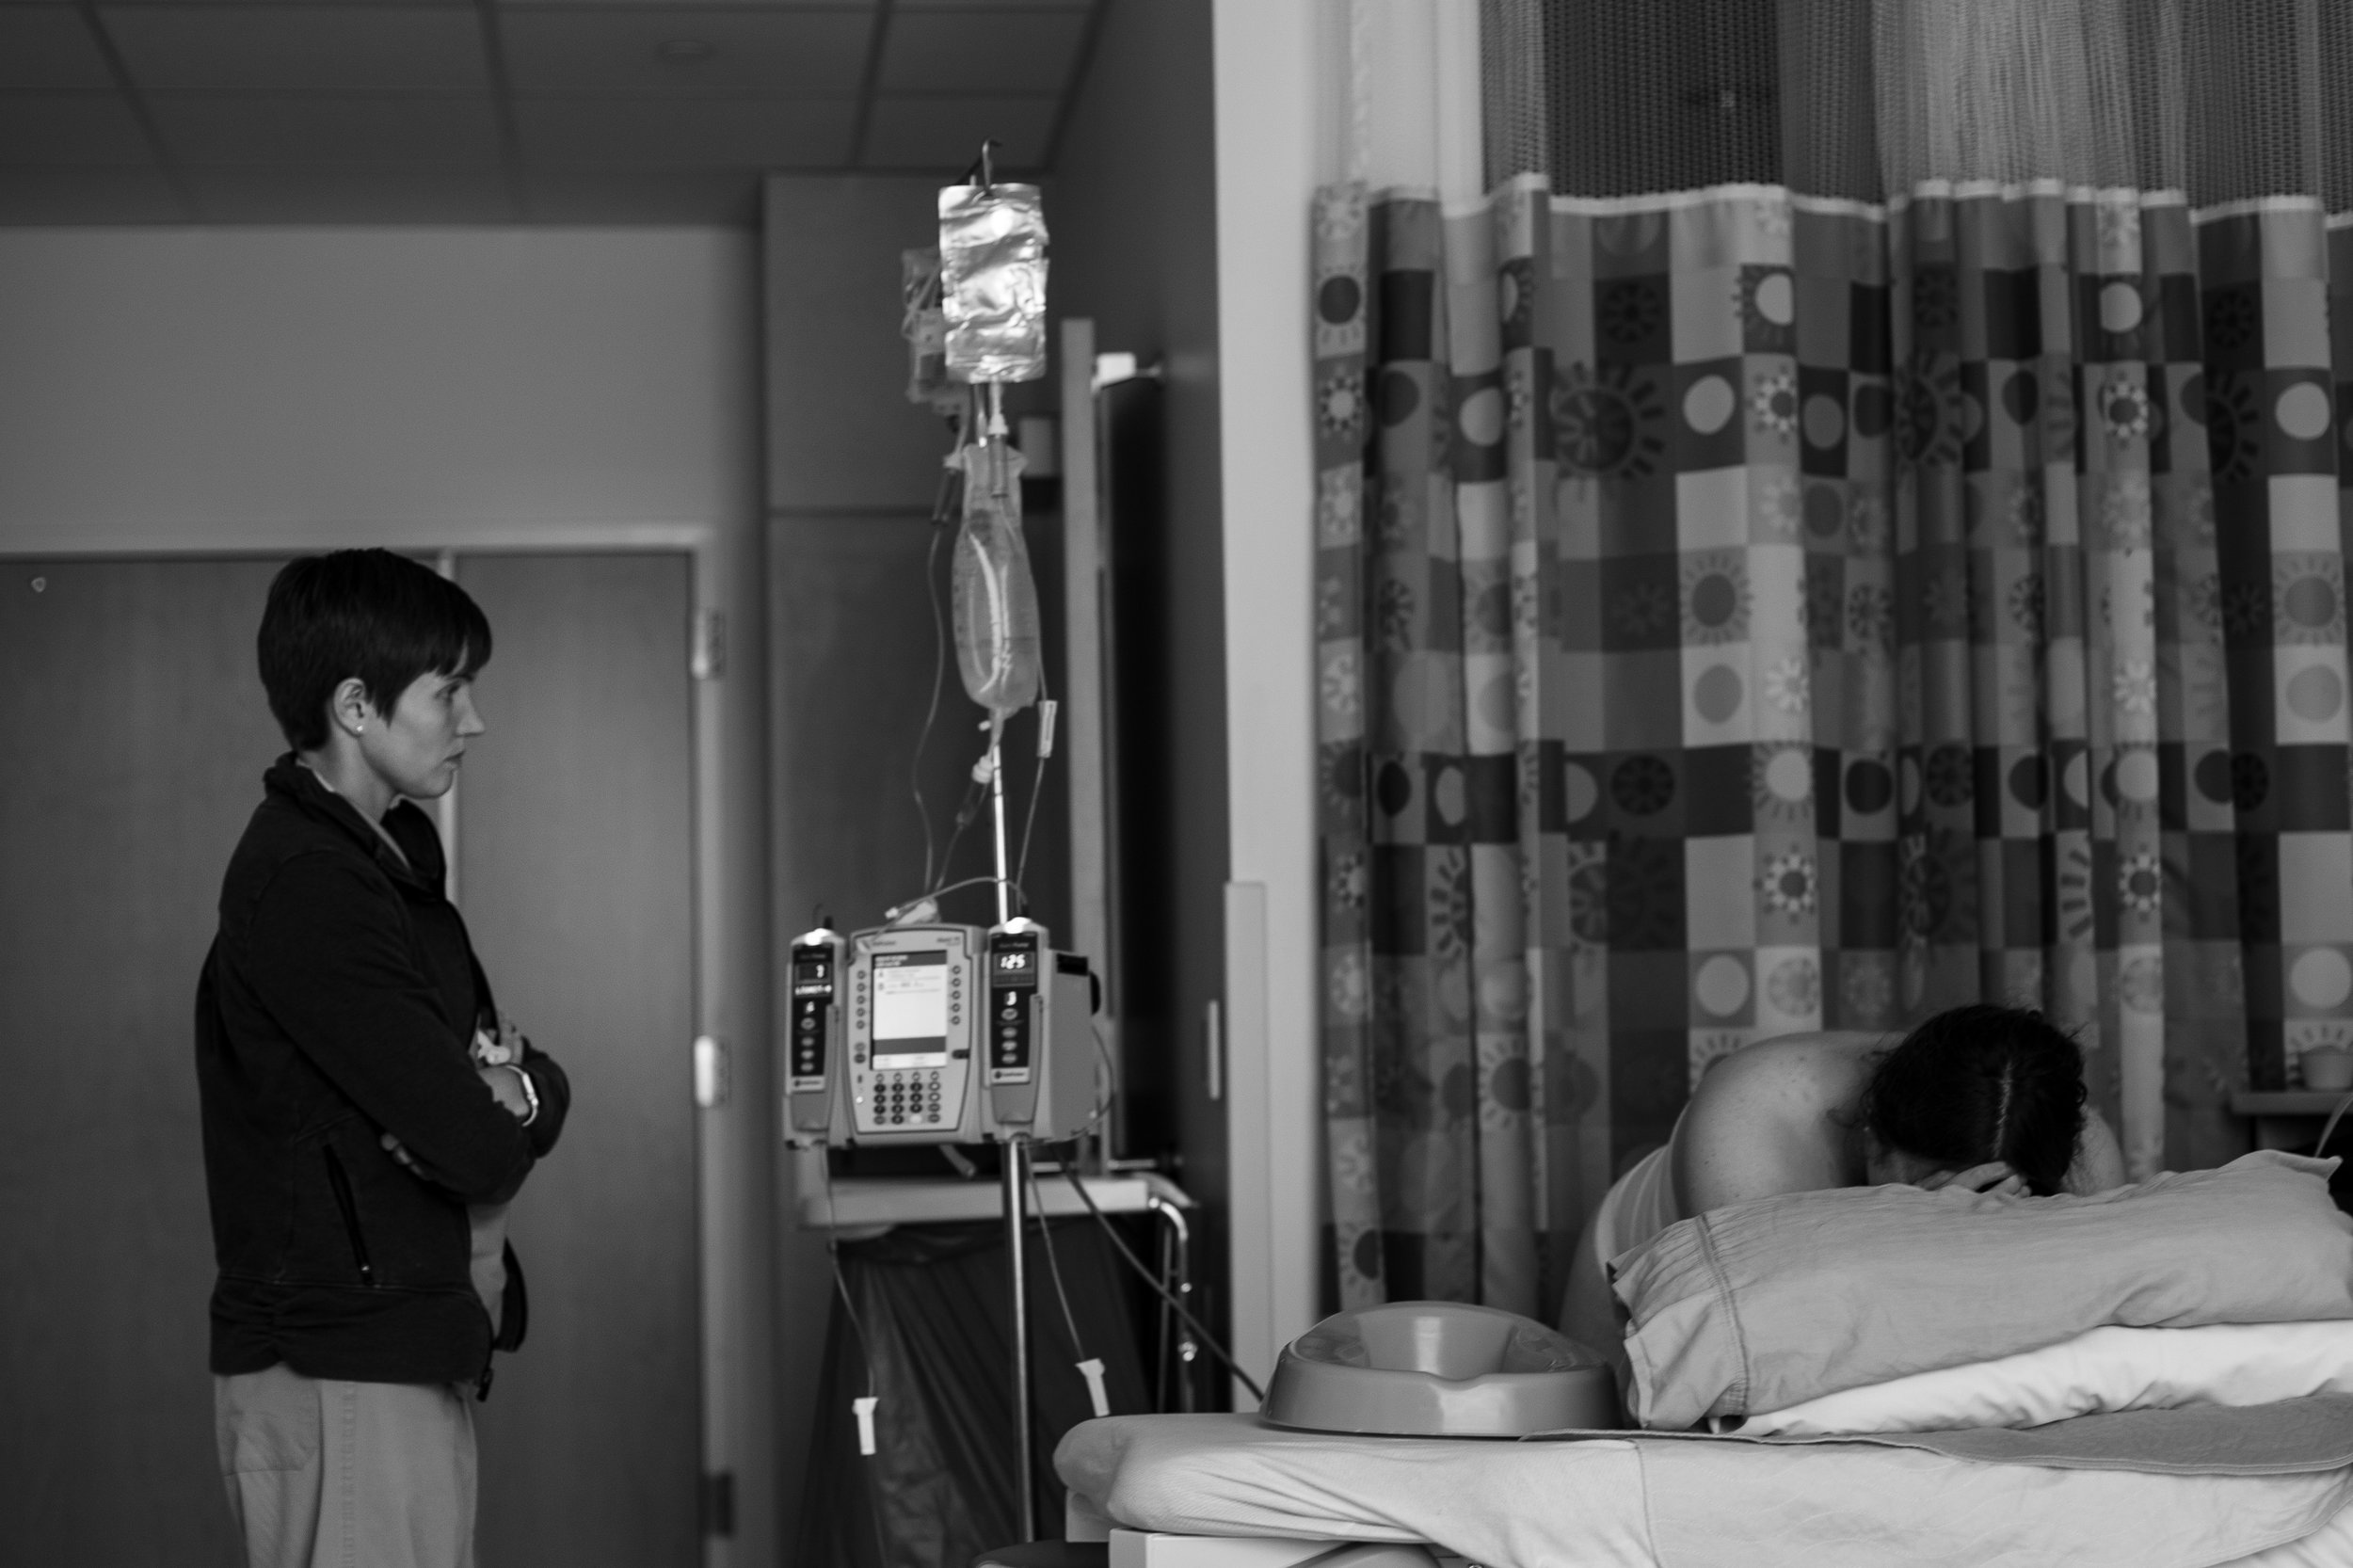 Midwife watches a woman labor in the hospital. 